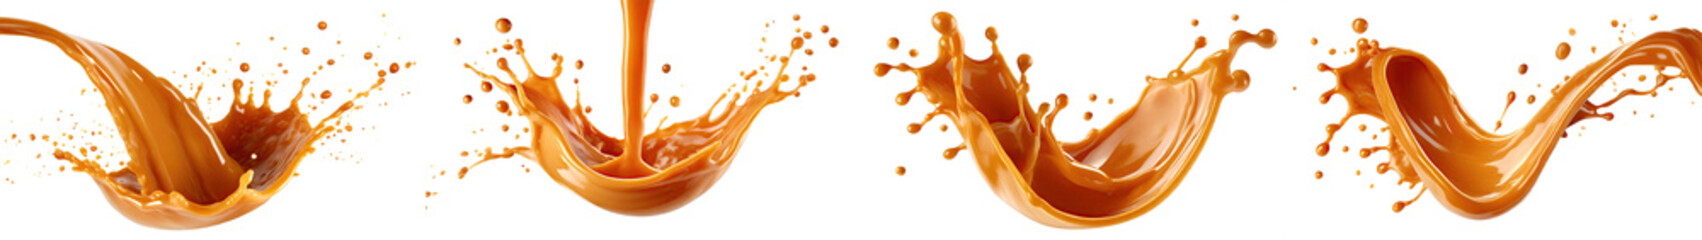 Set of caramel splashes, sweet liquid candy swirls, and waves splashing with droplets. Isolated brown melt toffee syrup stream with splatters and dynamic motion, perfect for ads and promo design.